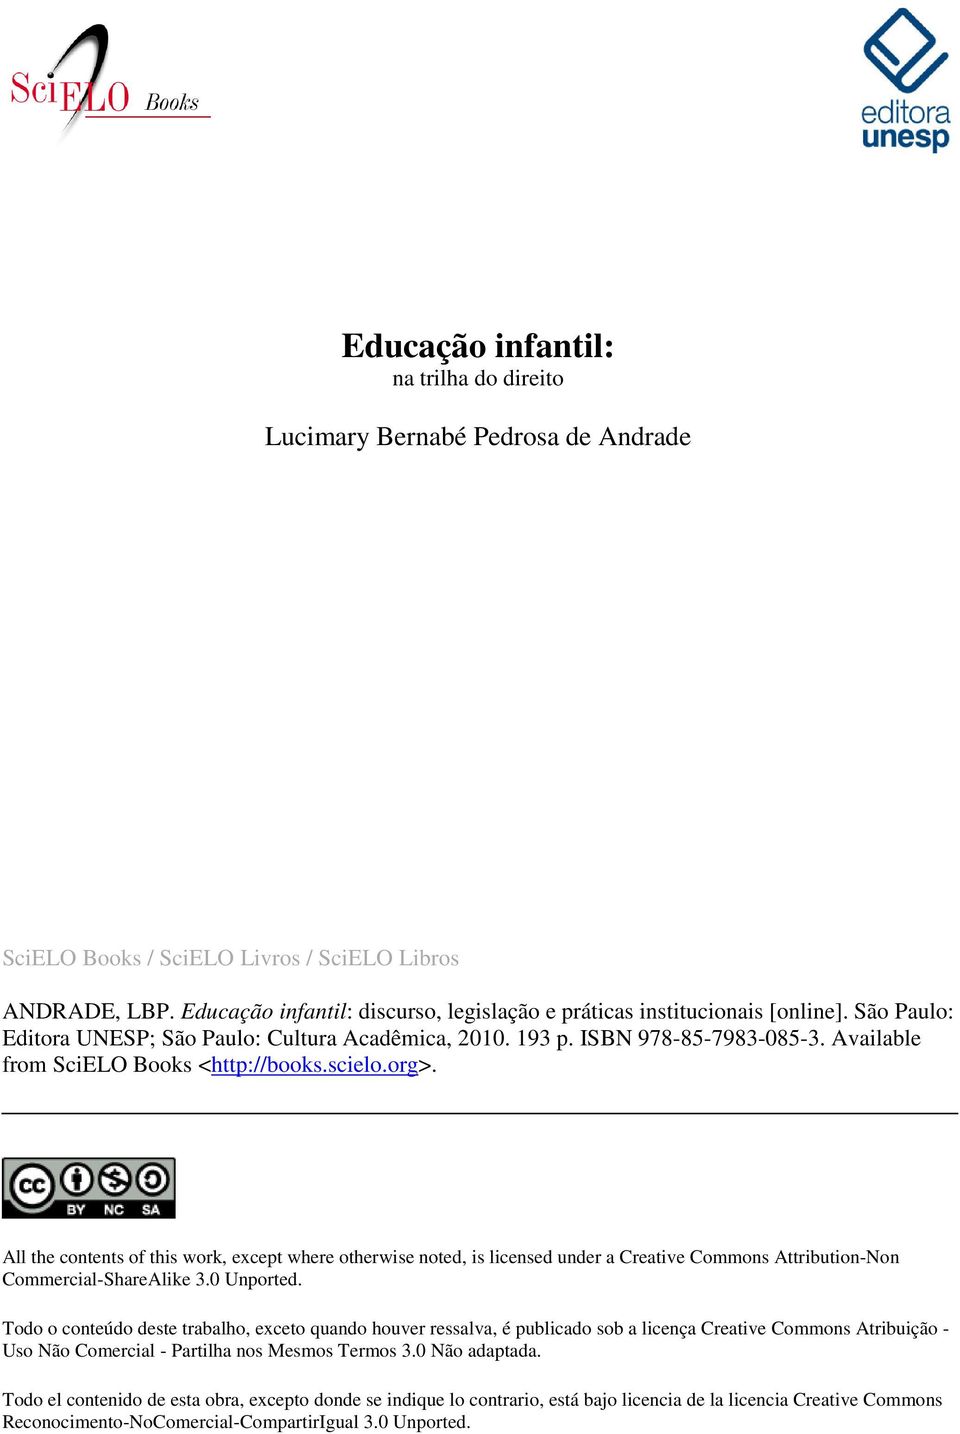 Available from SciELO Books <http://books.scielo.org>. All the contents of this work, except where otherwise noted, is licensed under a Creative Commons Attribution-Non Commercial-ShareAlike 3.